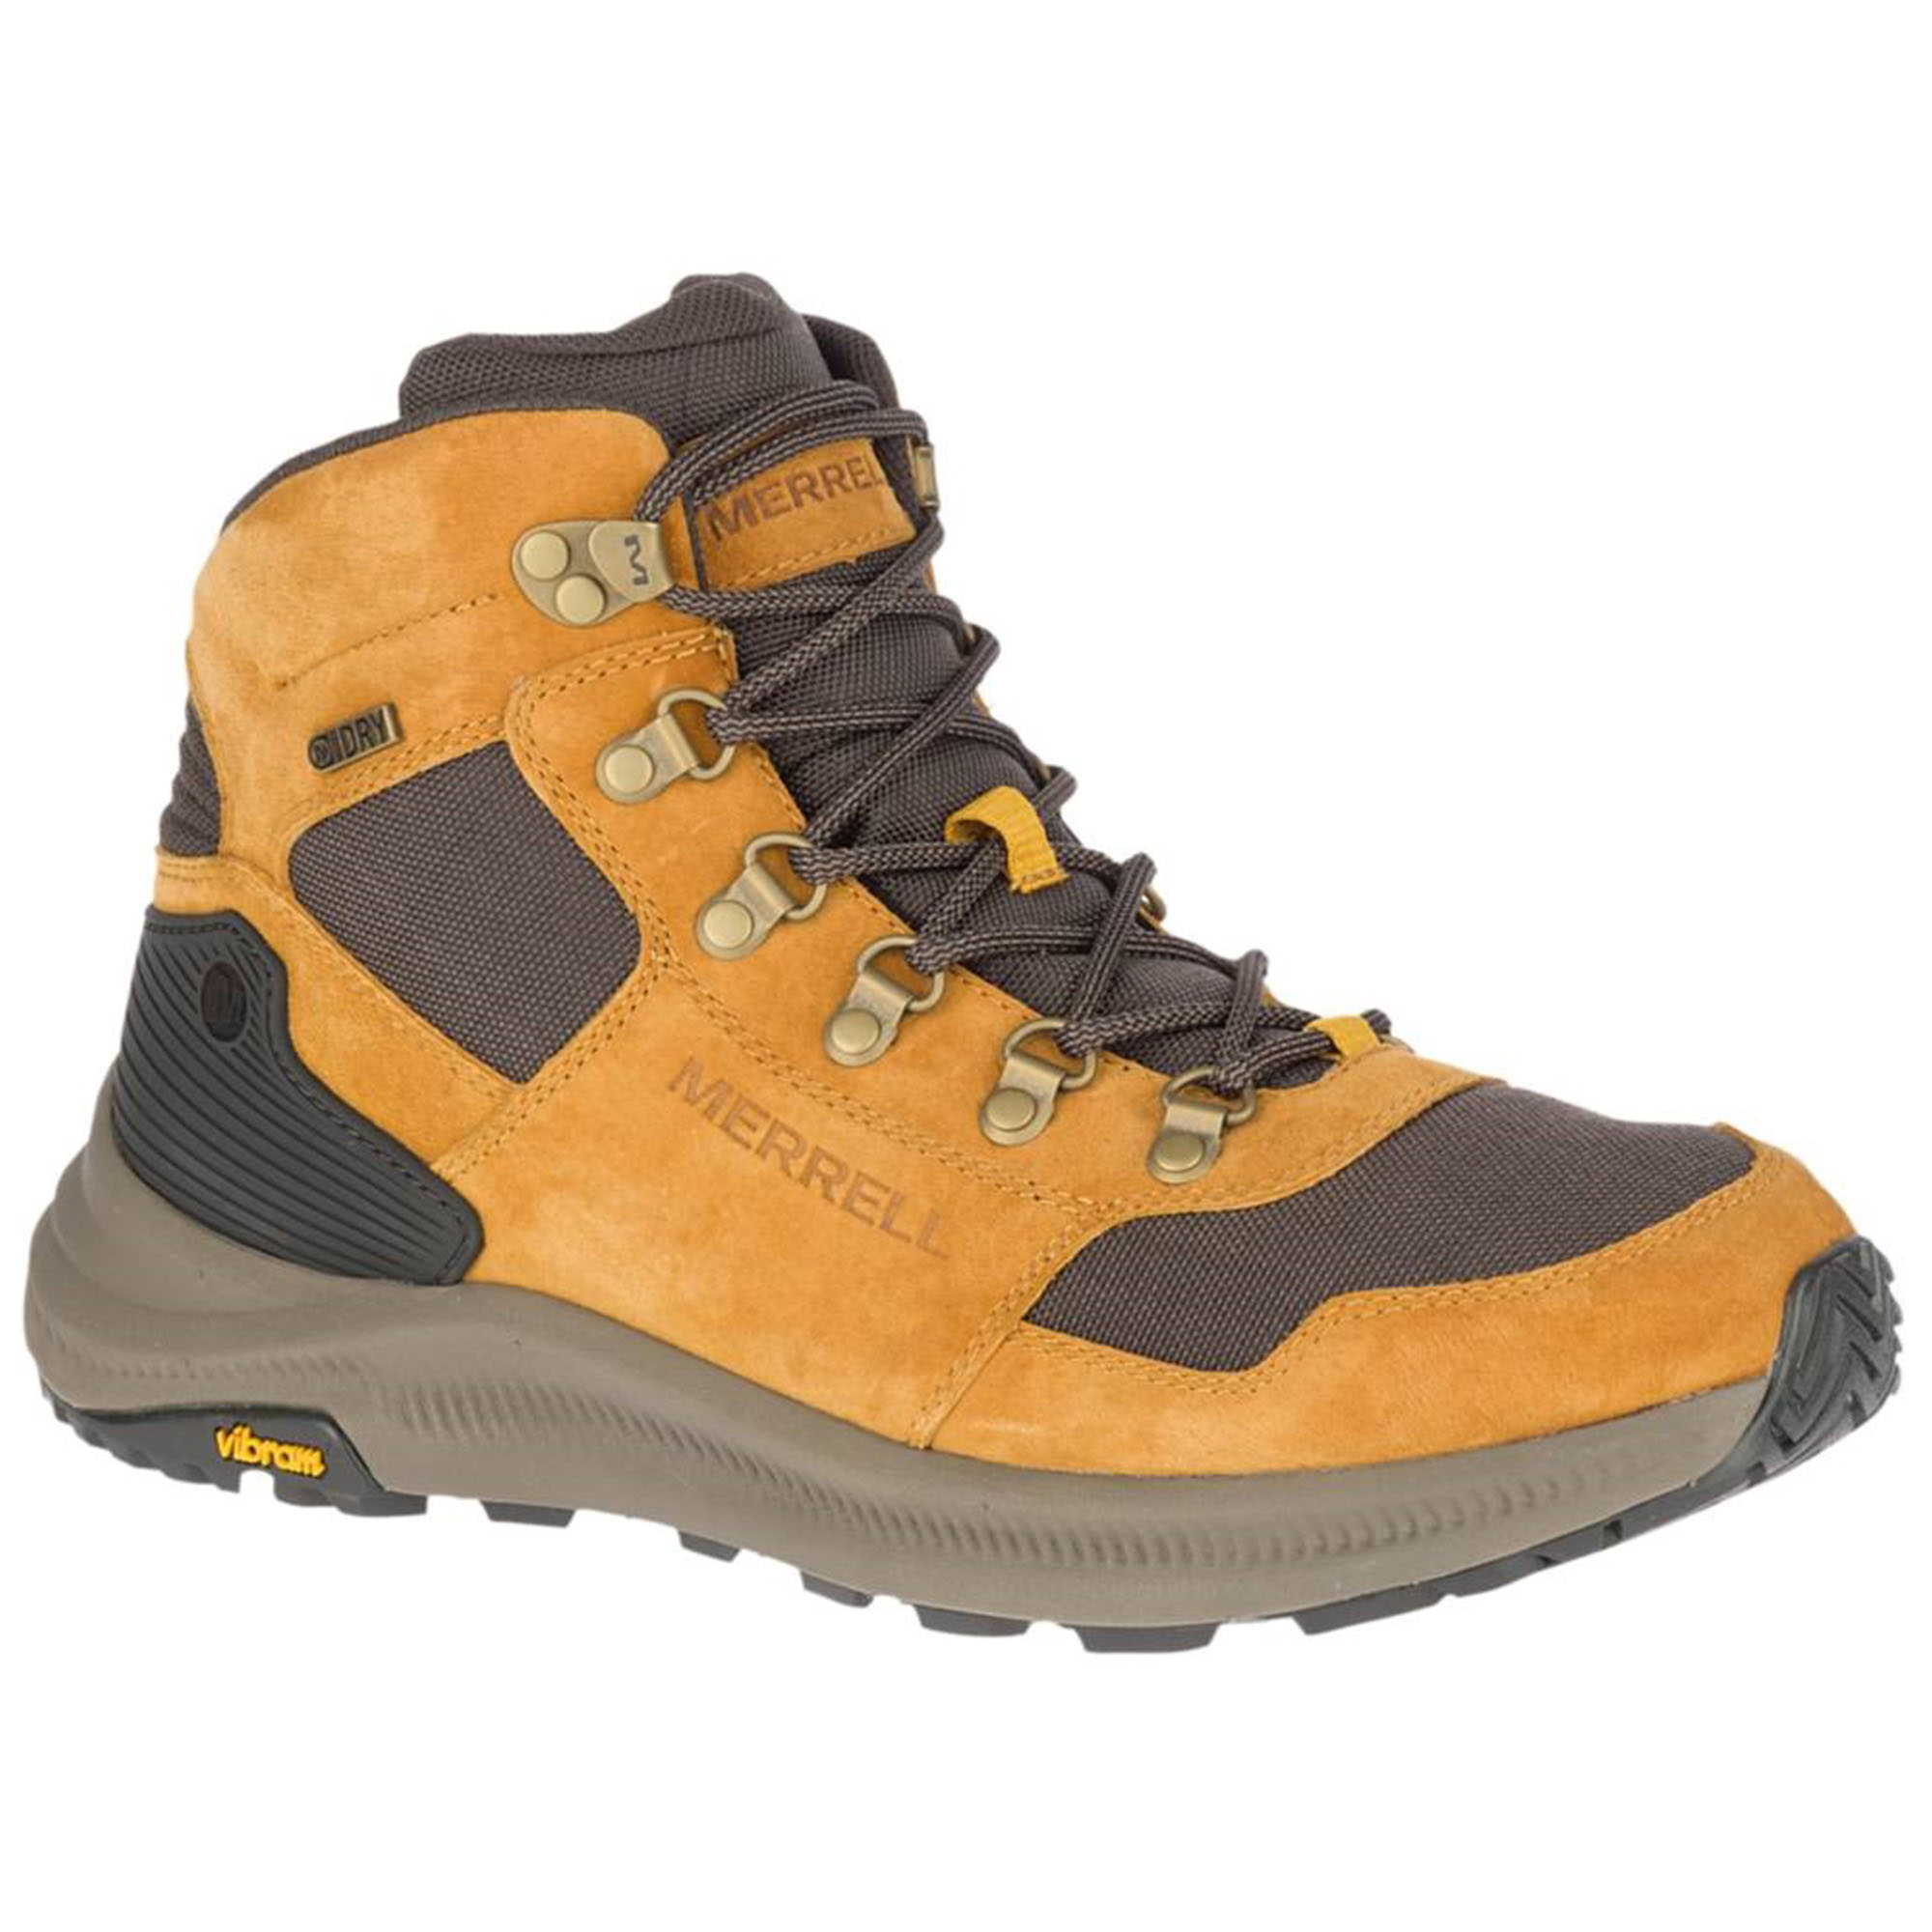 merrell hiking shoes clearance